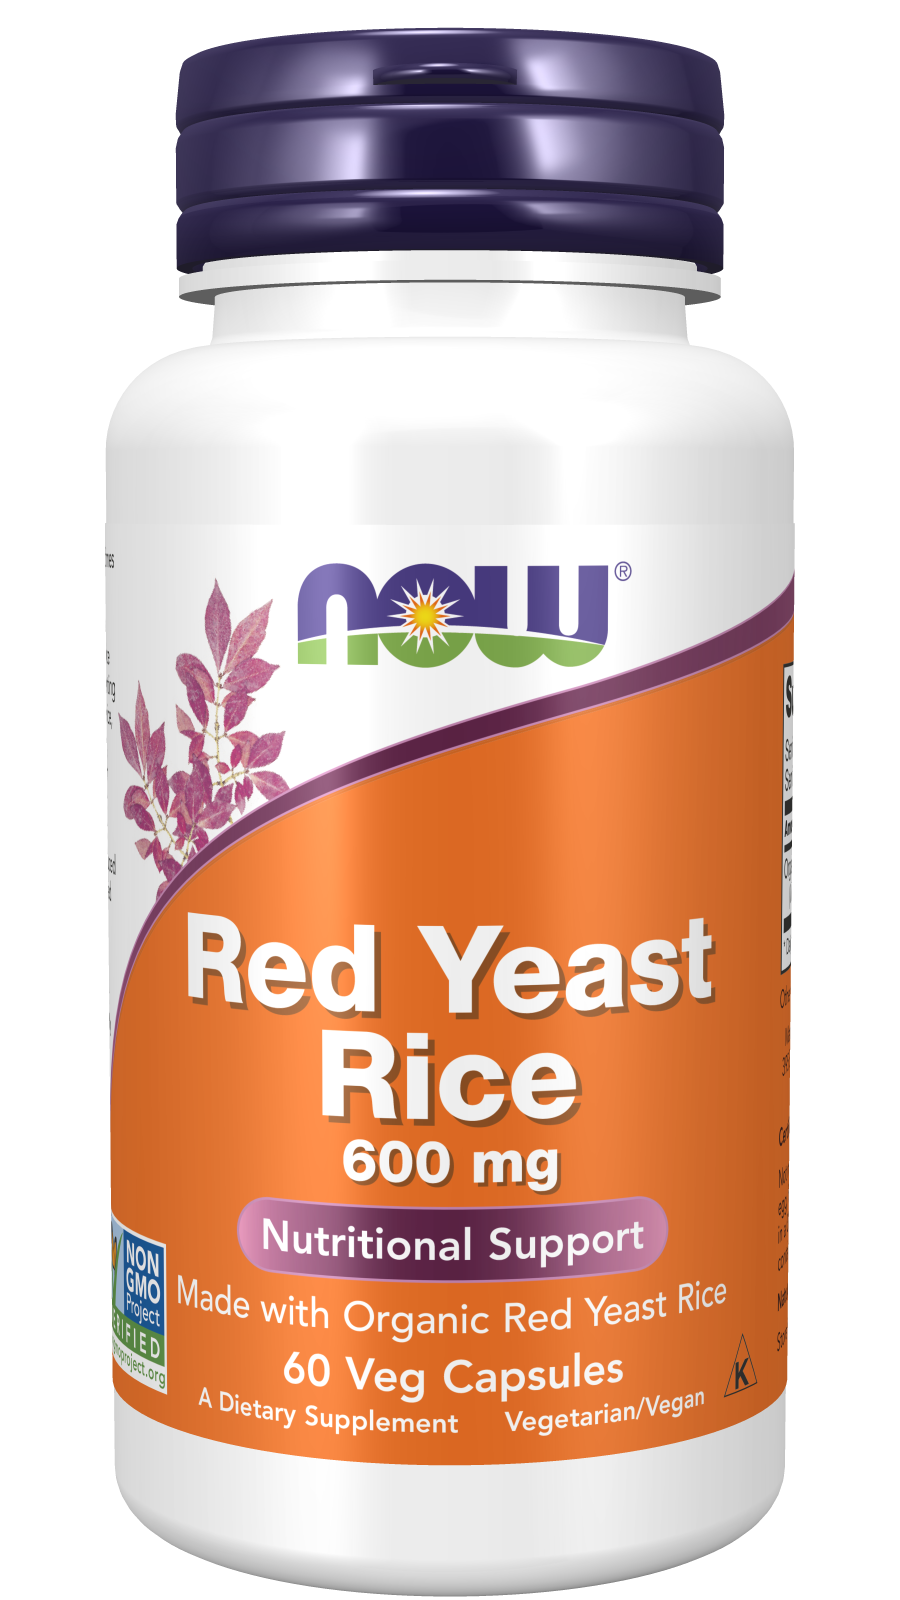 Red Yeast Rice 600 mg - 60 Veg Capsules Bottle Front